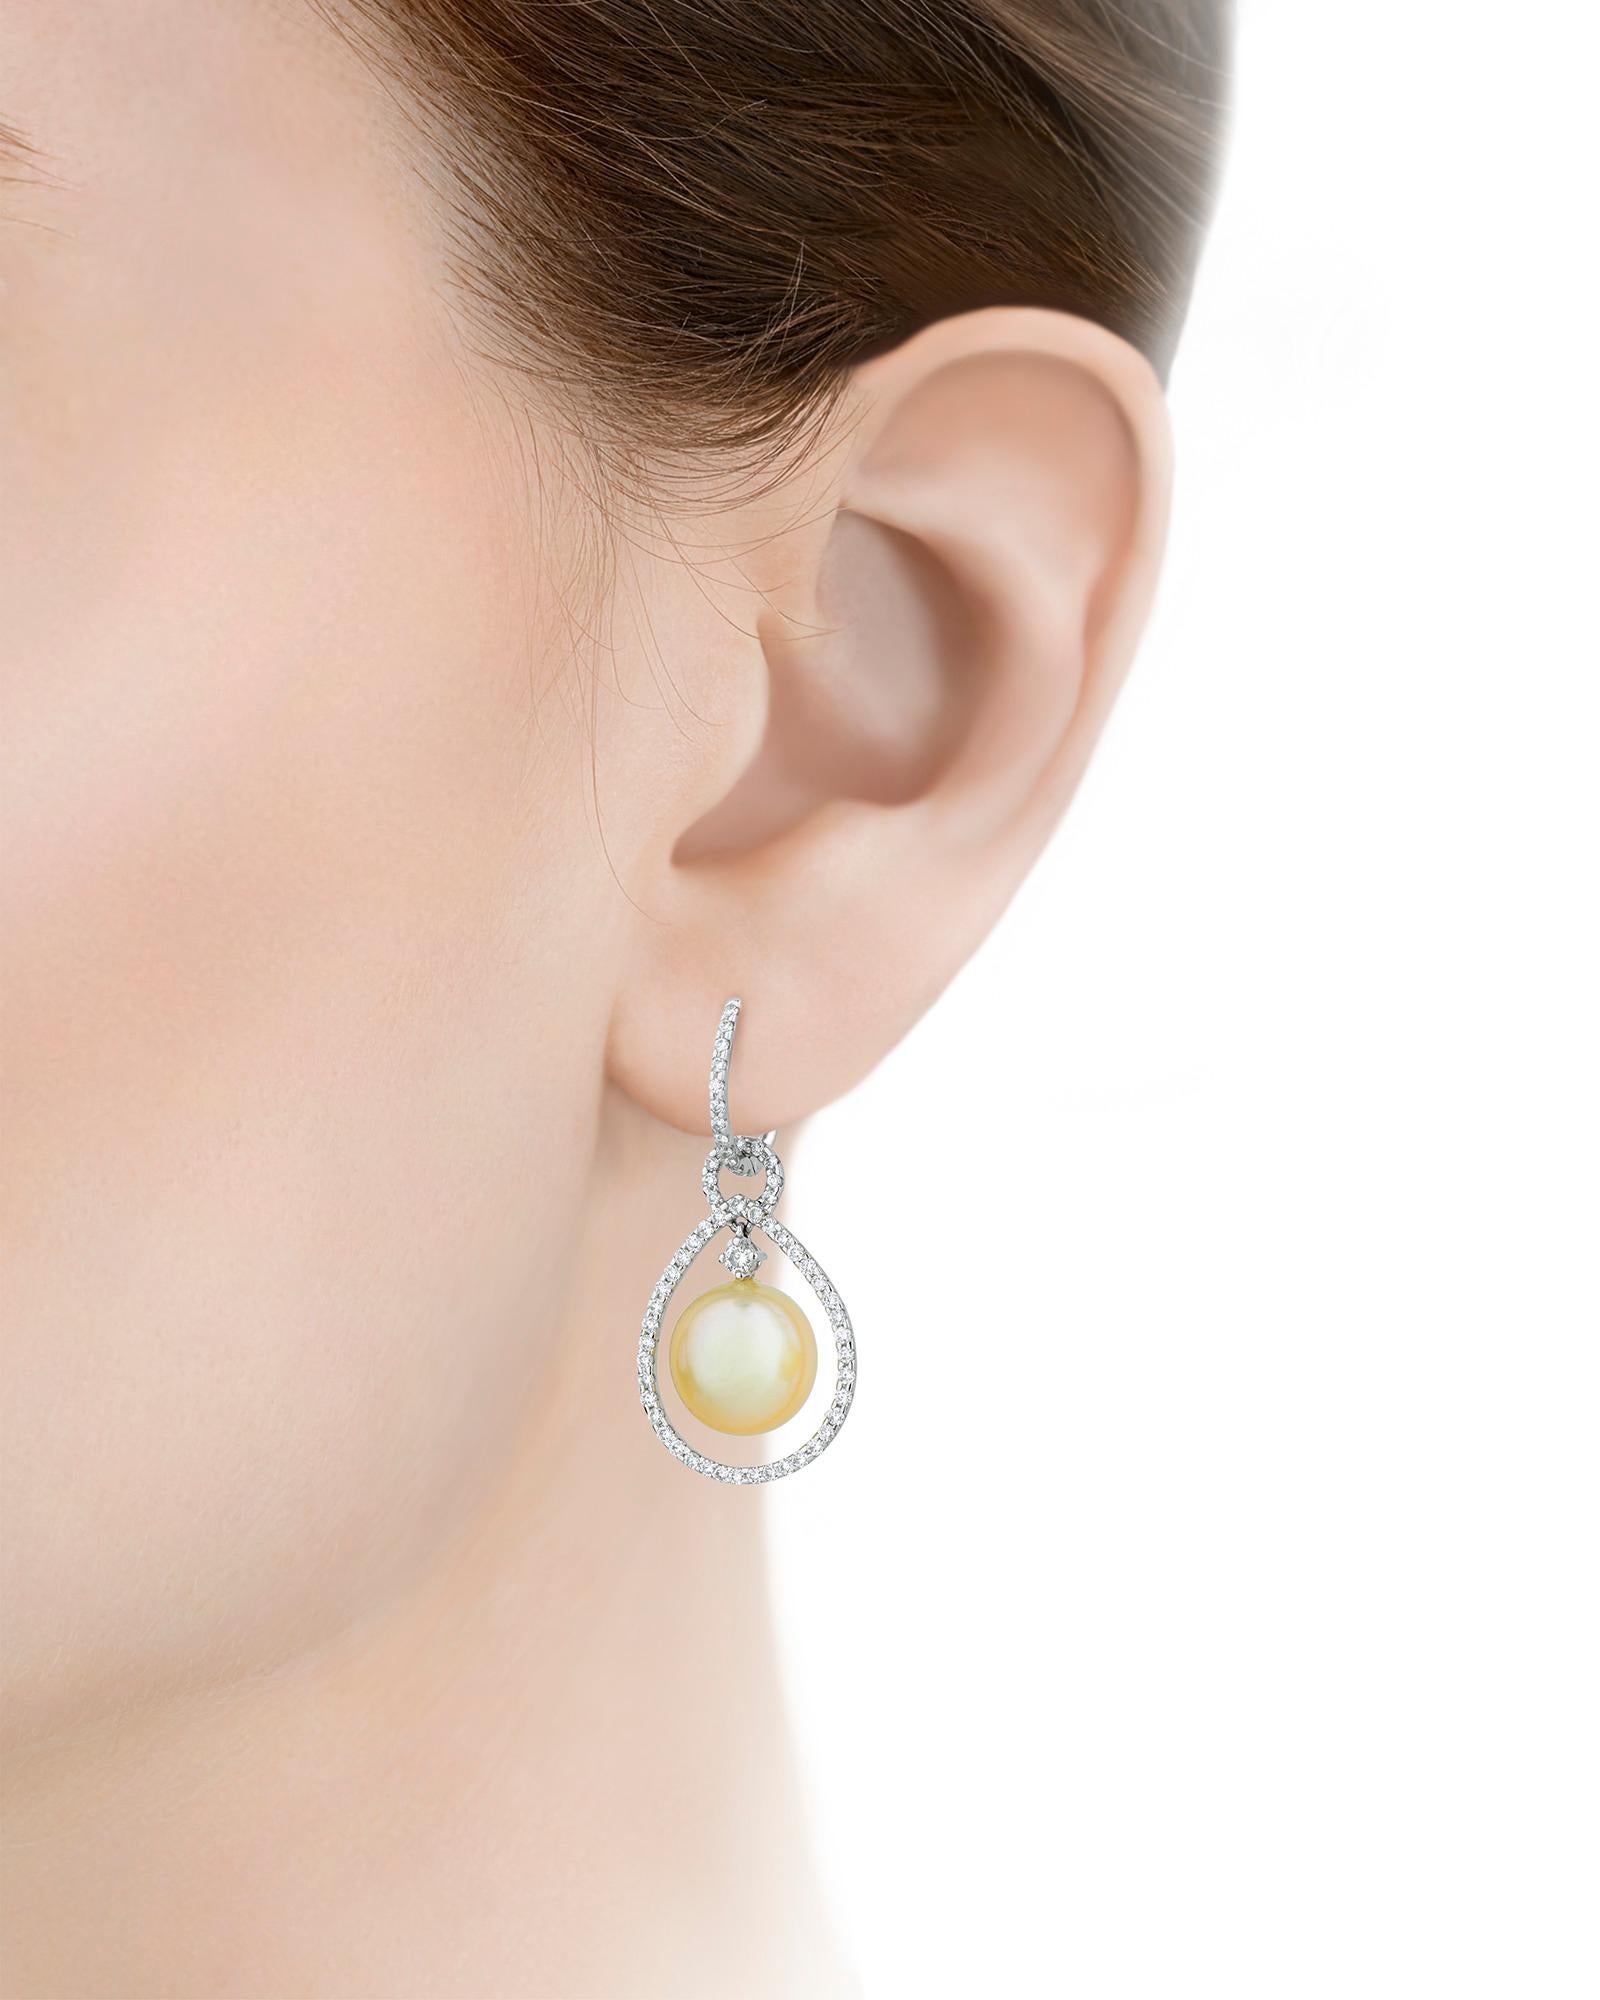 Two golden pearls dangle at the center of these elegant teardrop earrings. Perfectly matched in size and color, this exceptionally rare pair measure an impressive 11mm. Dozens of brilliant white, pavé-cut diamonds totaling 1.15 carats encircle the